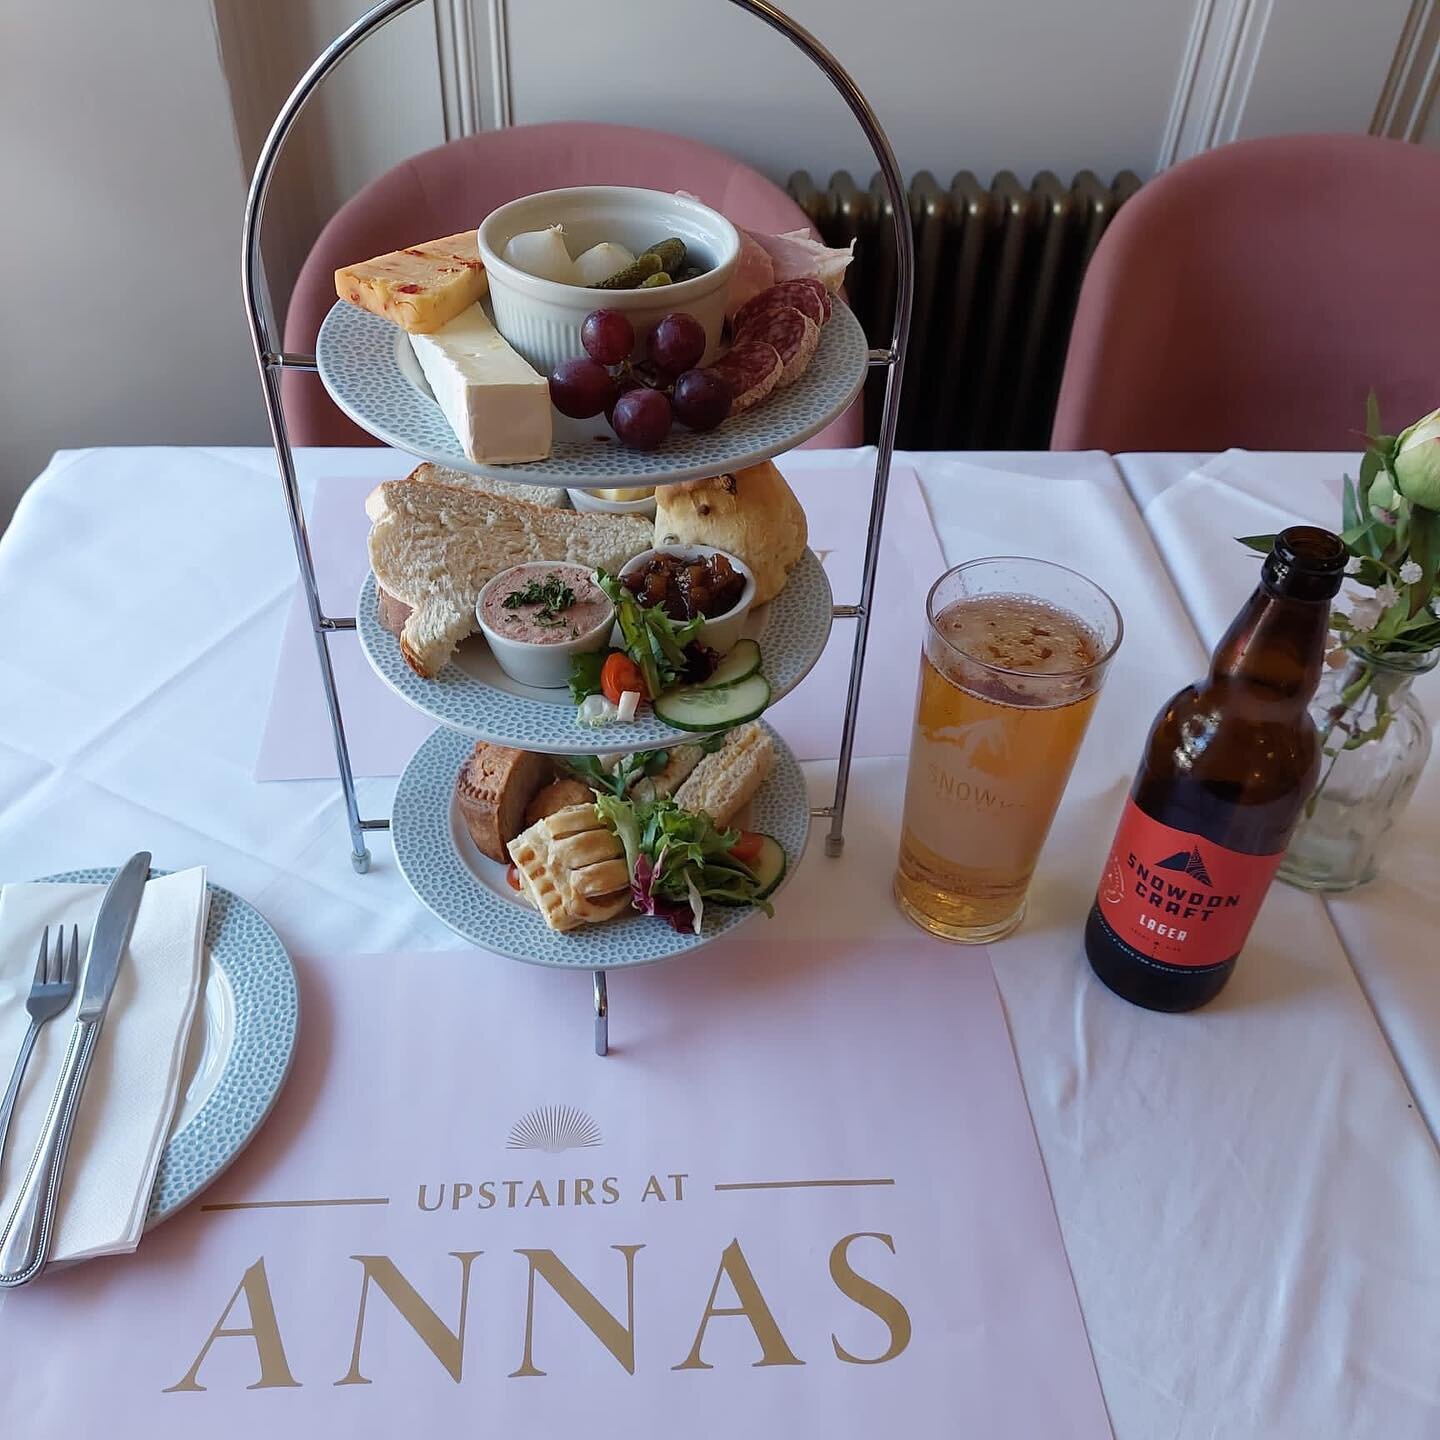 Treat Dad this Sunday to our Father&rsquo;s Day Afternoon Tea served with Sandwiches
Pork pie
Scotch egg
Sausage roll
Pate
Cheese &amp;chili scone
Cheese selection 
Salami
Roast ham
Pickles
Chutney
And a Snowdon Craft Beer